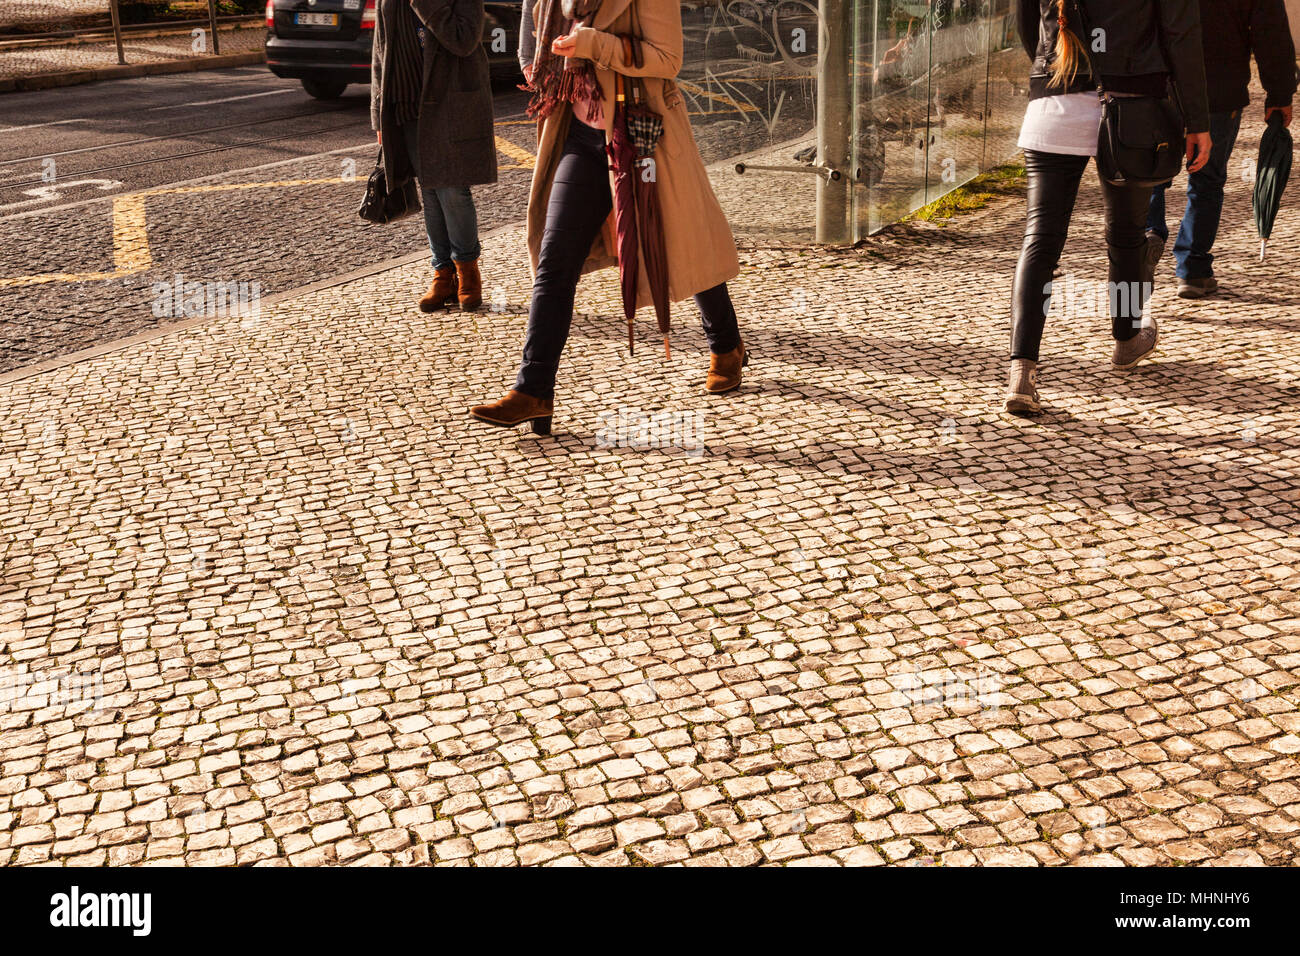 27 February 2018: Lisbon, Portugal - Portugese Pavement, or calcada portuguesa, the tiled or mosaic pavements found in many pedestrian areas in Portug Stock Photo